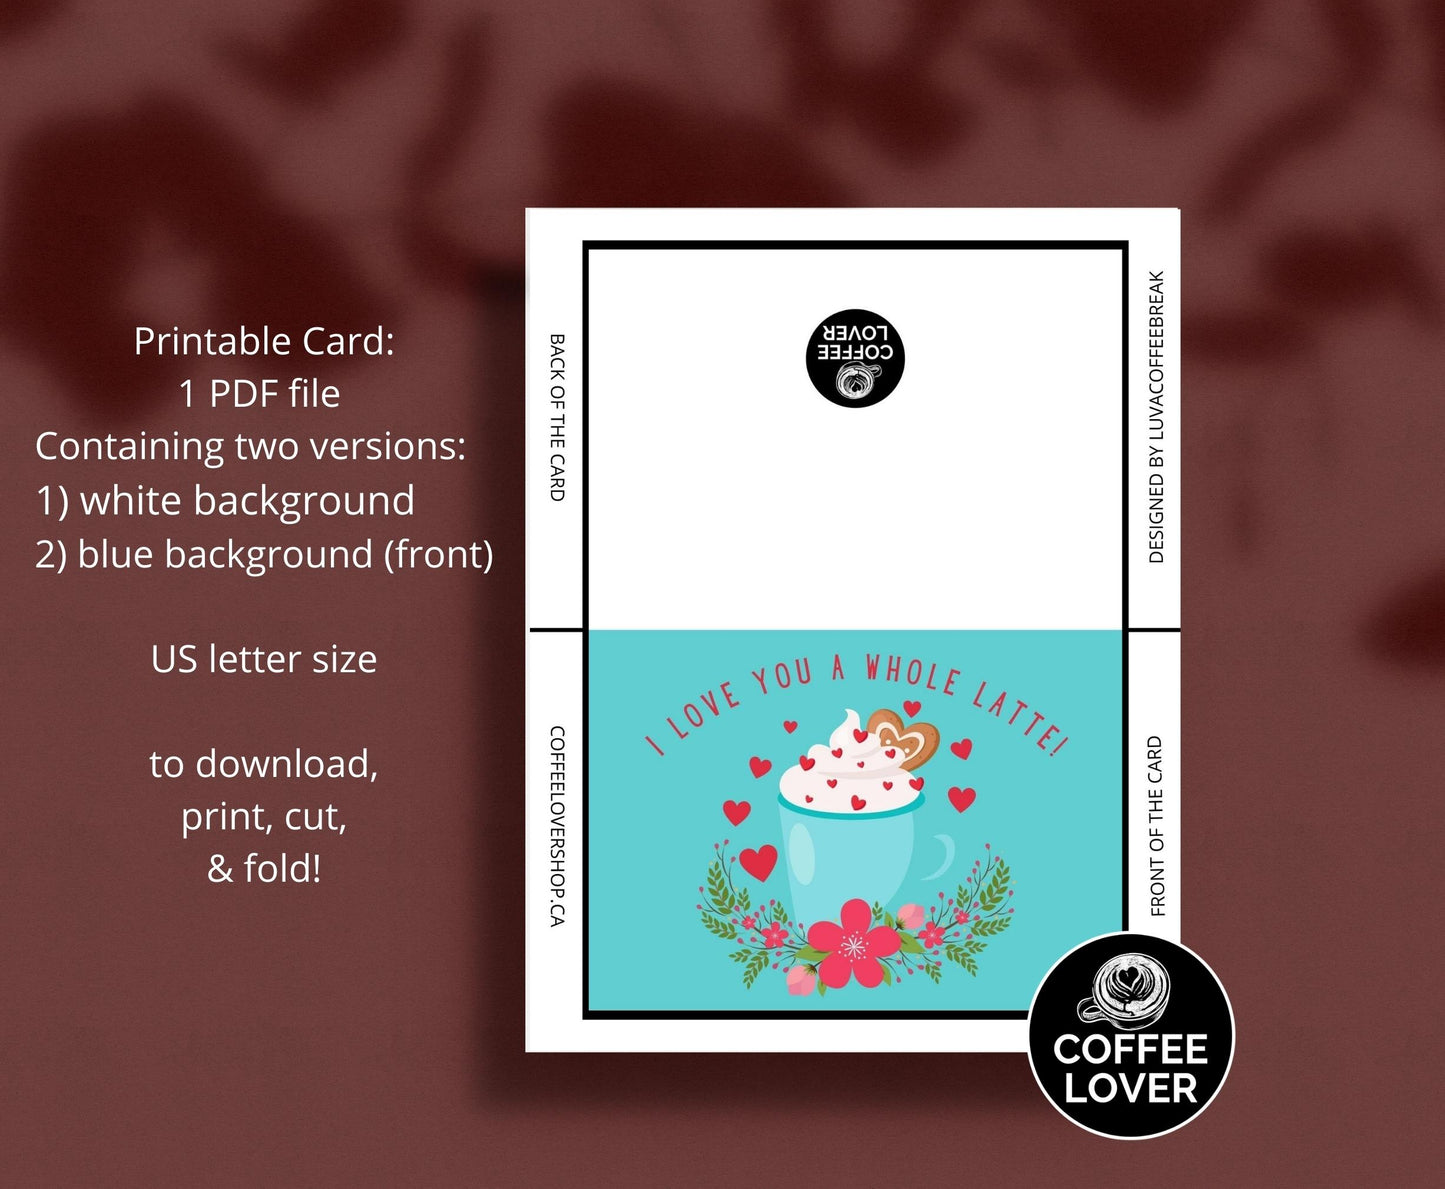 Printable Whole Latte Love Greeting Card Instant Download 7x5 inch